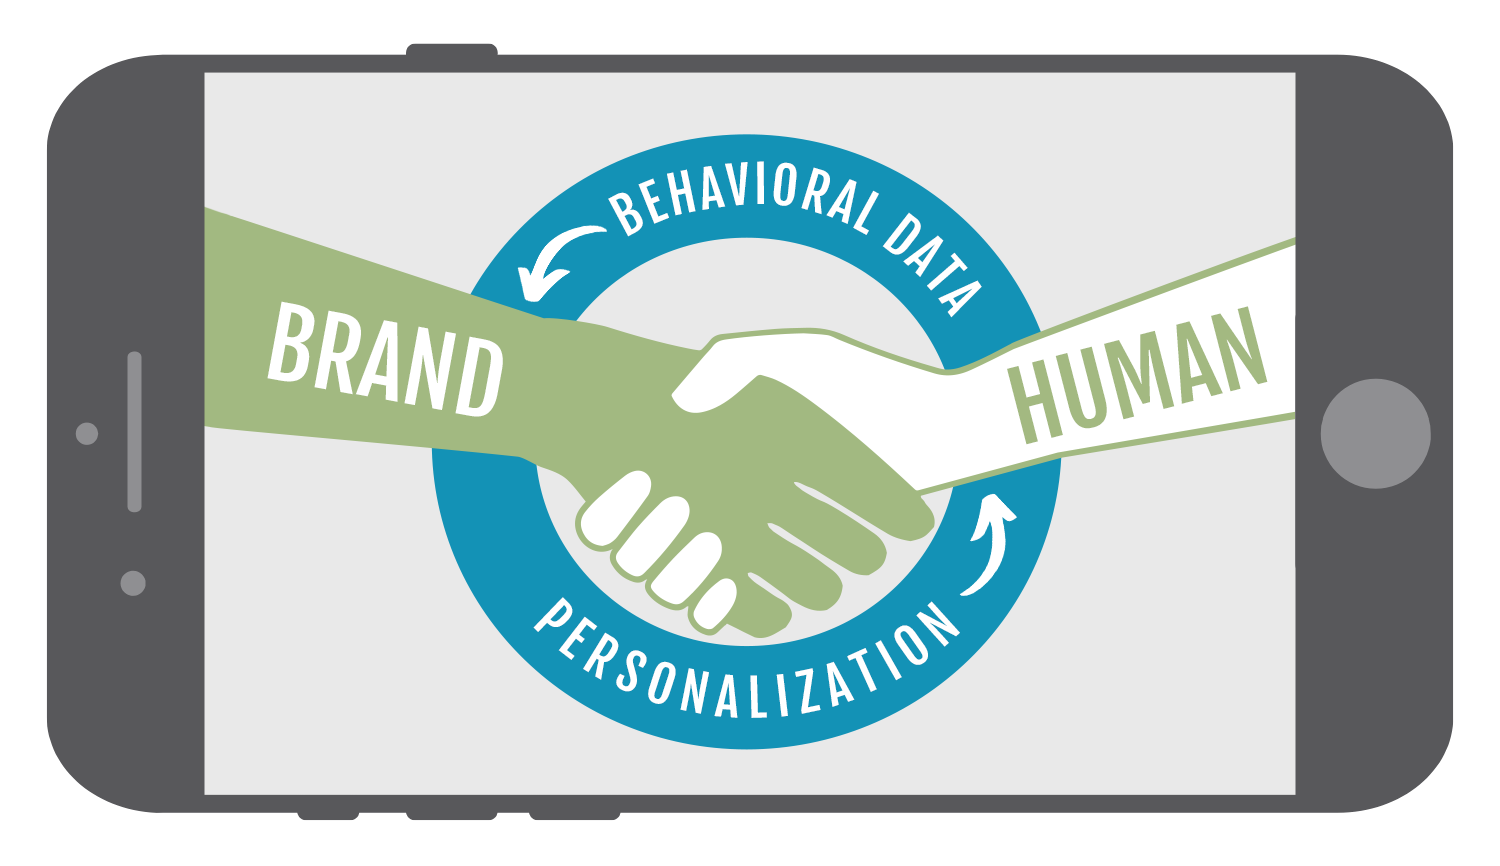 A cellphone screen showing two people shaking hands. One hand is labelled "brand", the other "human". There is an arrow from the human to the brand that says "behavioral data" and the opposite way that says "personalization"